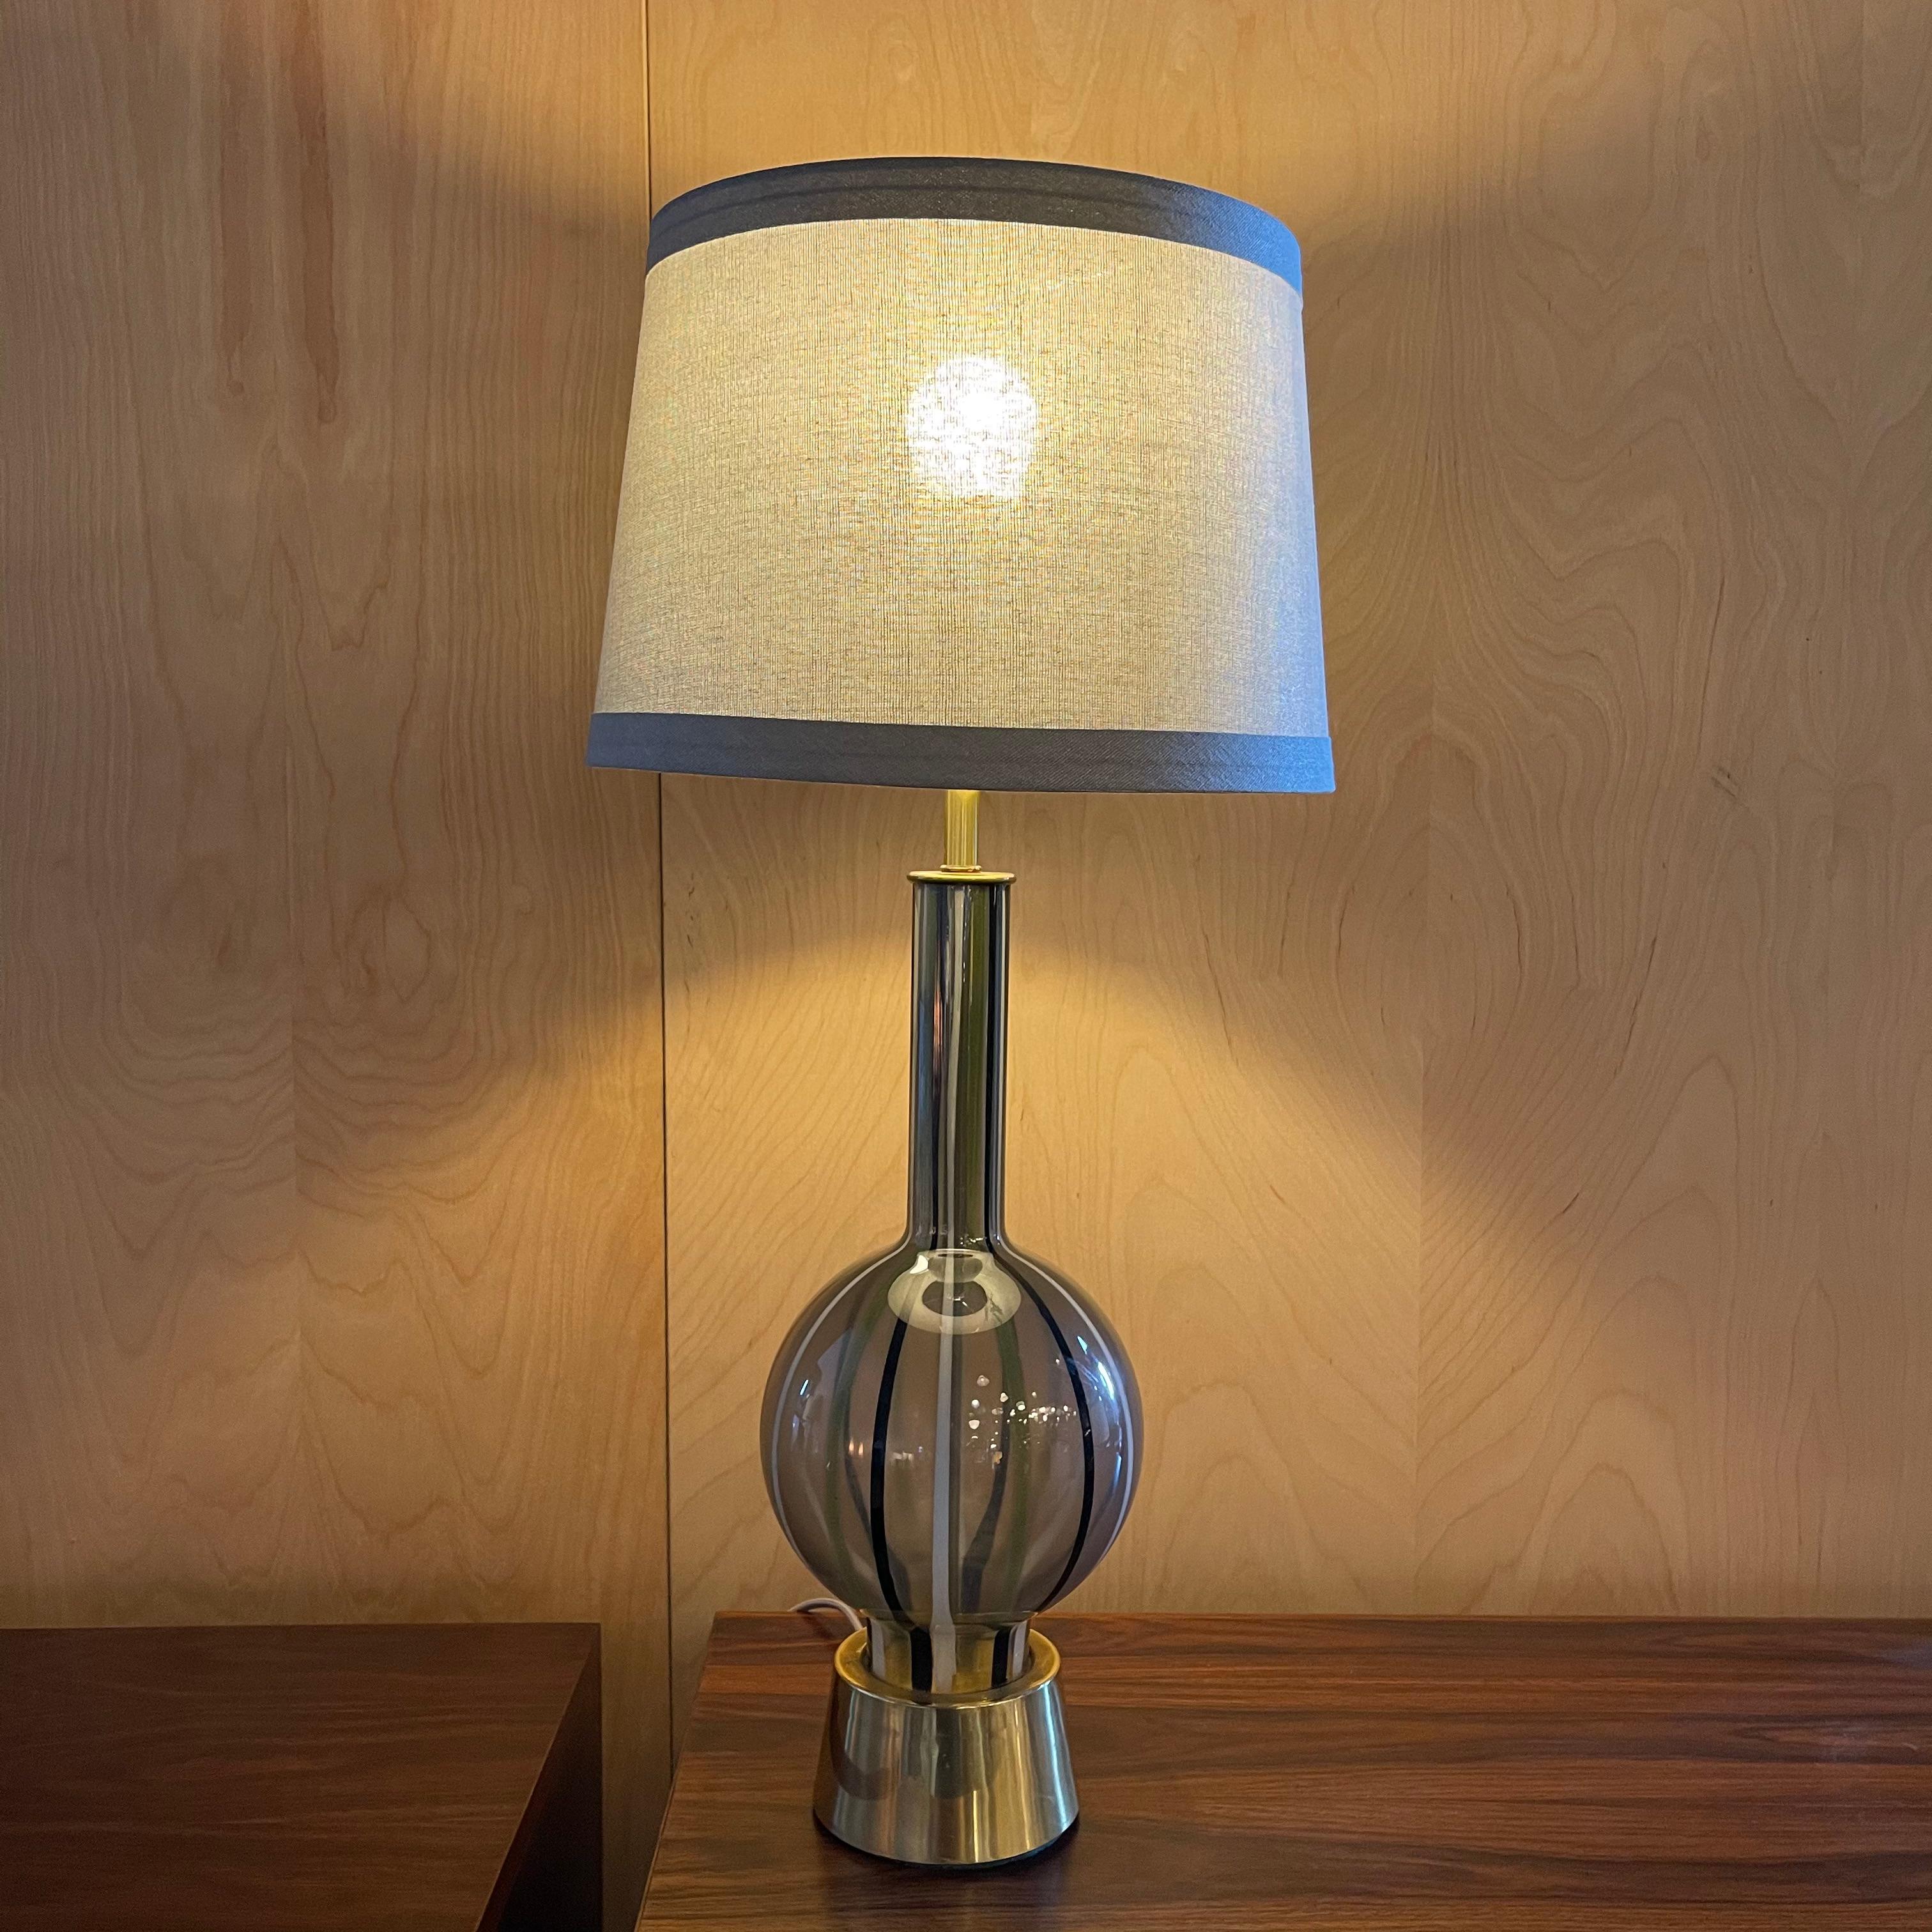 Mid-Century Modern table lamp features a striped glass, genie bottle base with brass-plated metal accents. The lamp shade 10-13 diameter x 9 ht inches, clips to the bulb. The overall height with the shade is 27 inches.